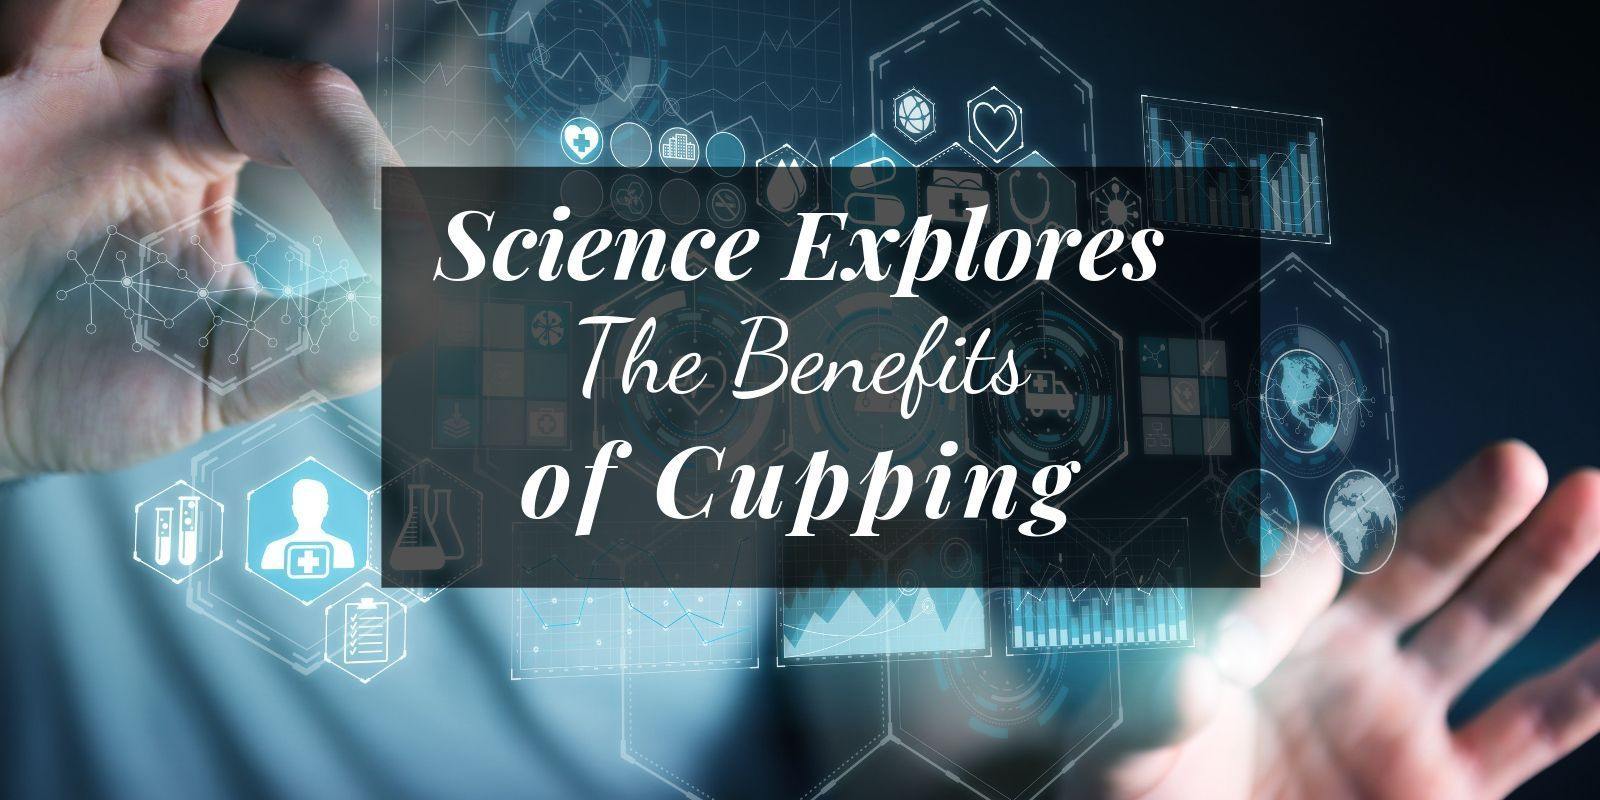 Does Cupping Work? Science Explores the Benefits of Cupping - Lure Essentials